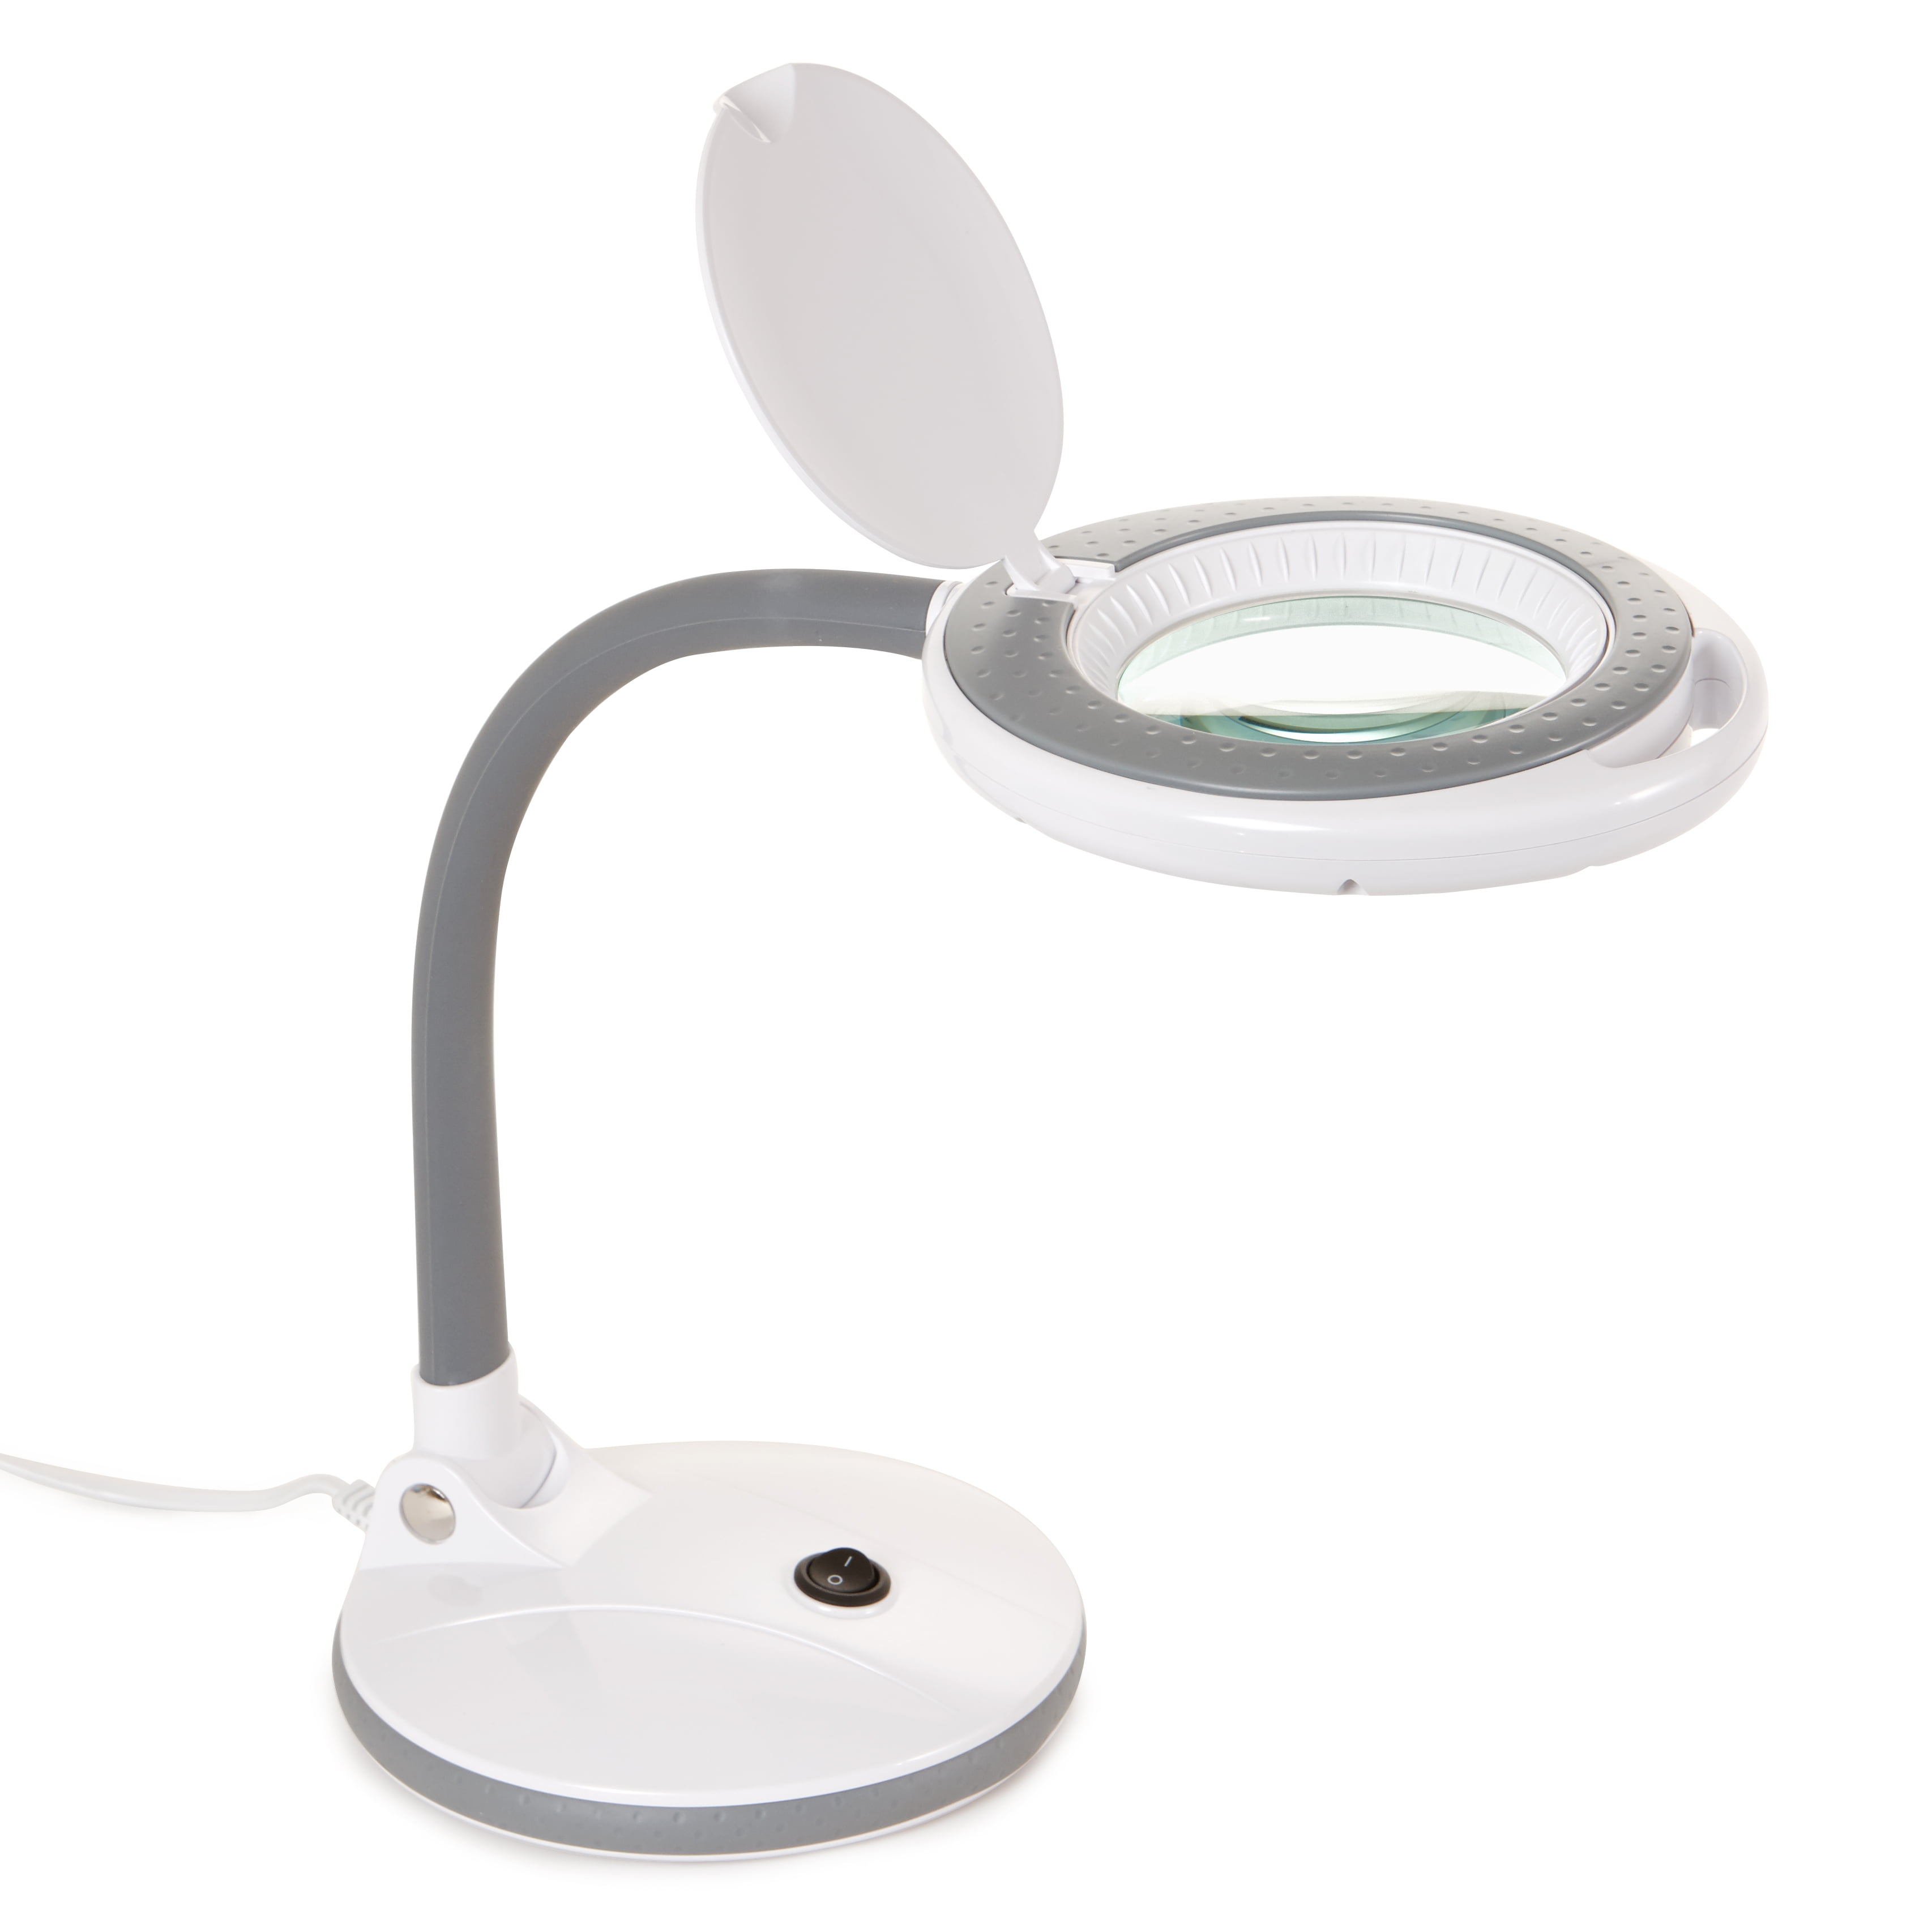 Firstlight Modern LED Table Lamp In White Finish With A Magnifying Glass  3753WH